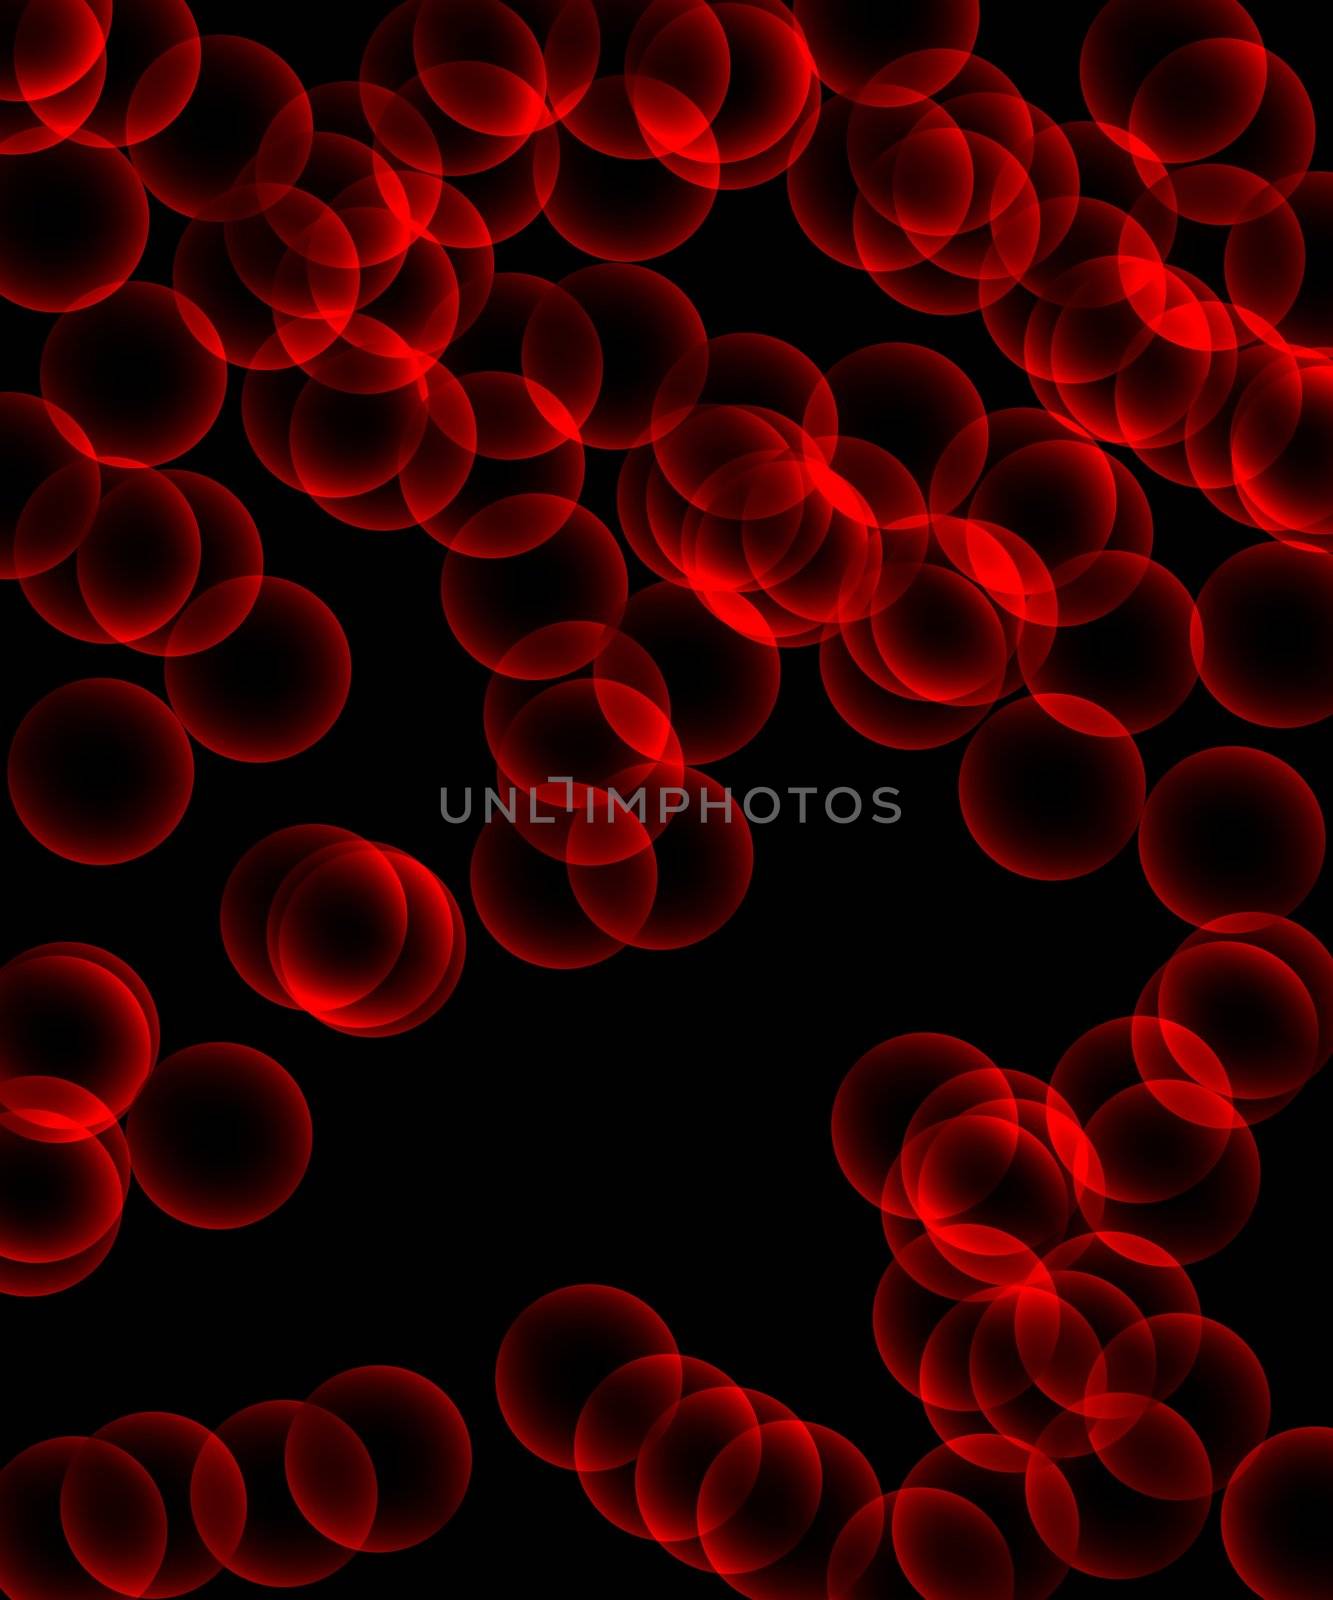 many red and transparent bubbles/ ballons flying diagonal over black background